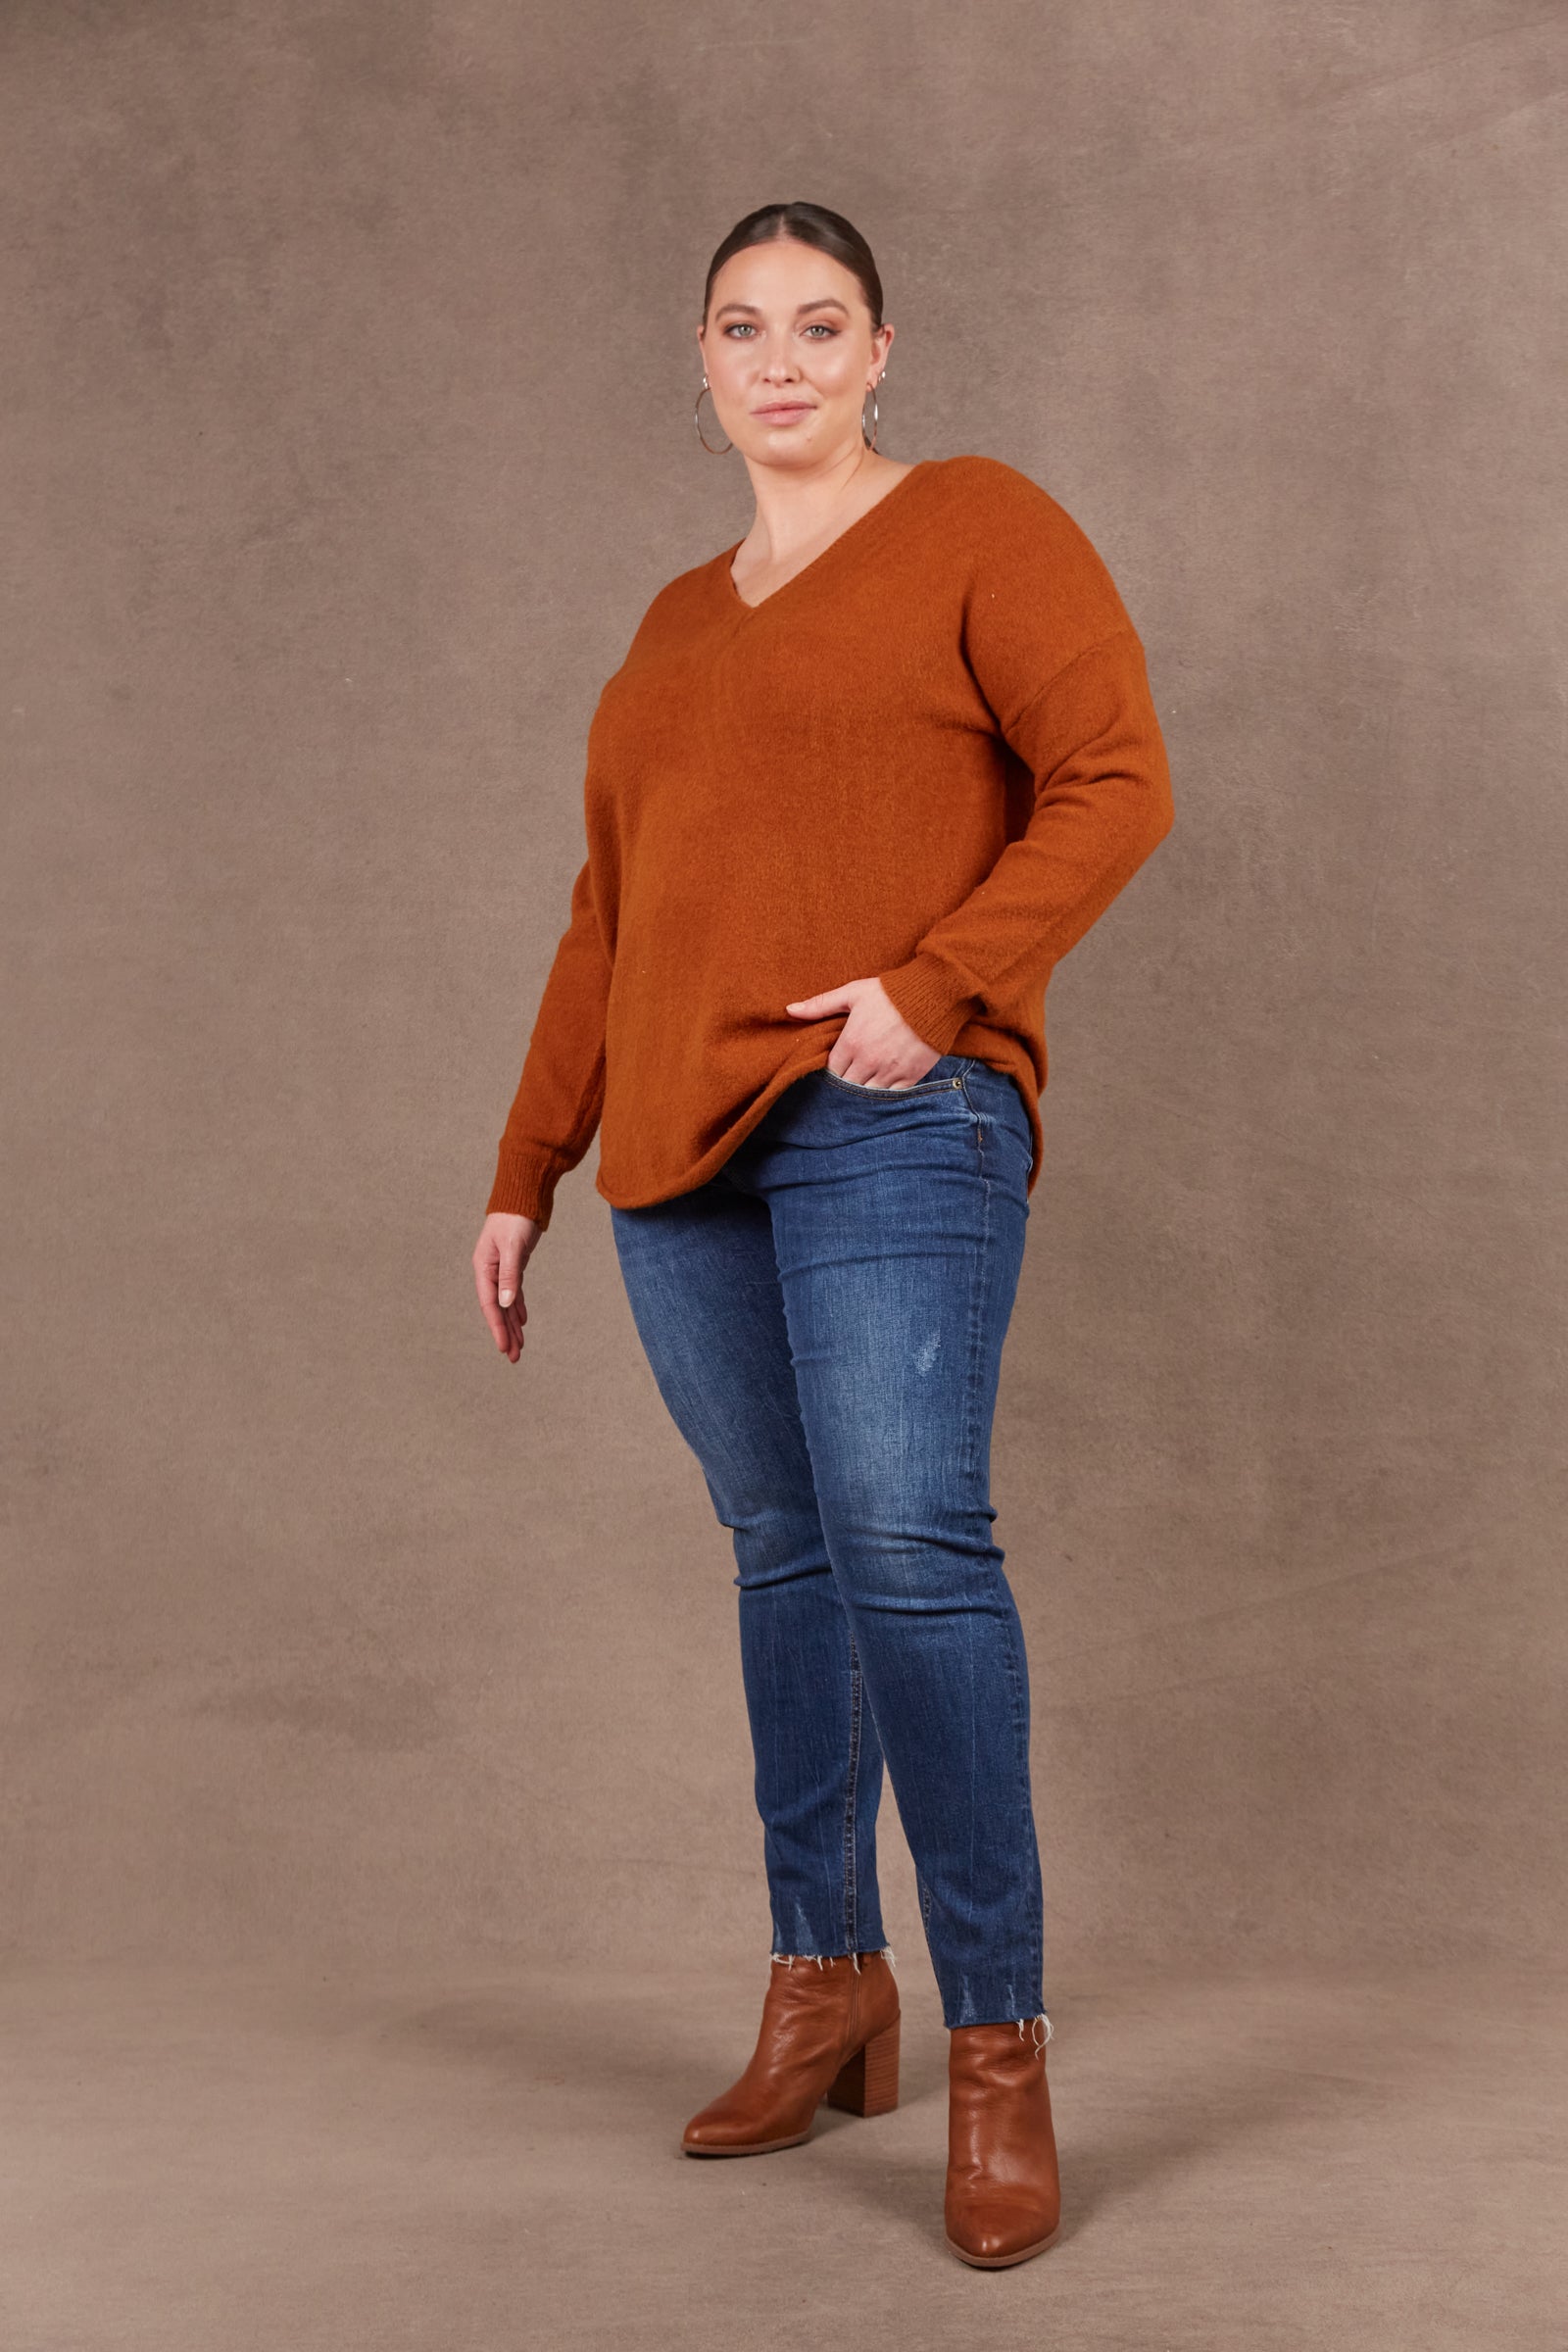 Paarl Knit - Ochre-Knitwear & Jumpers-Eb & Ive-The Bay Room